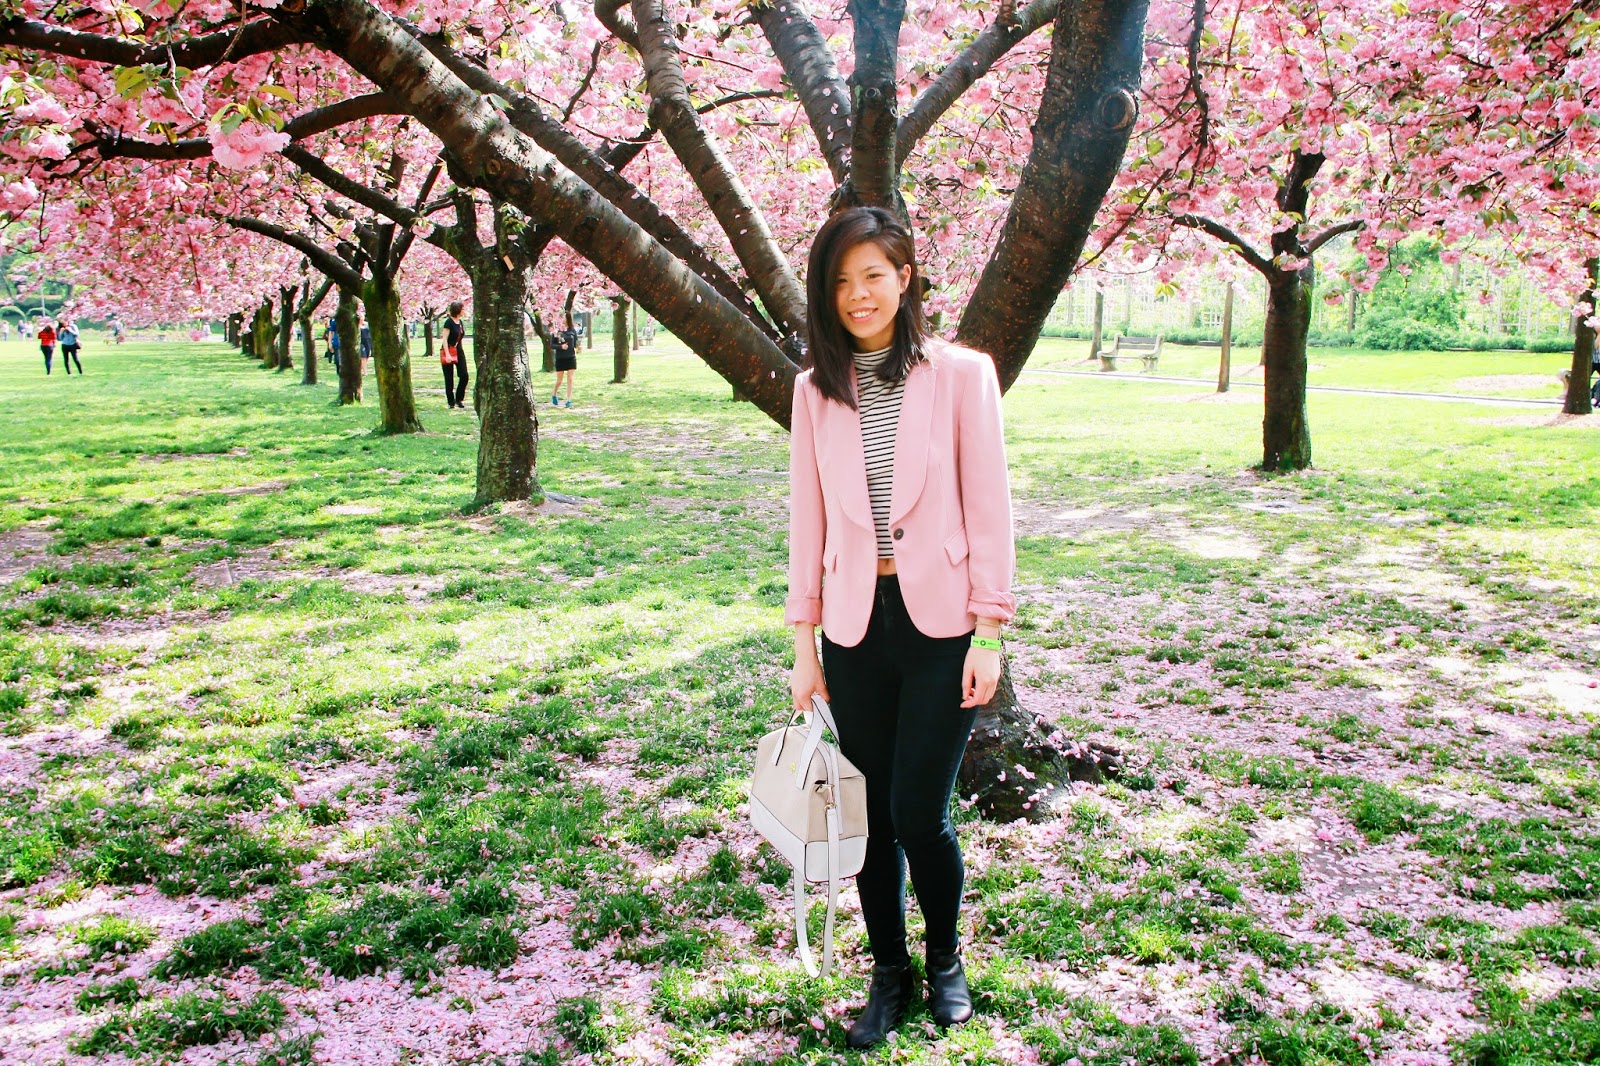 The district of columbia cherry blossoms engagement photos